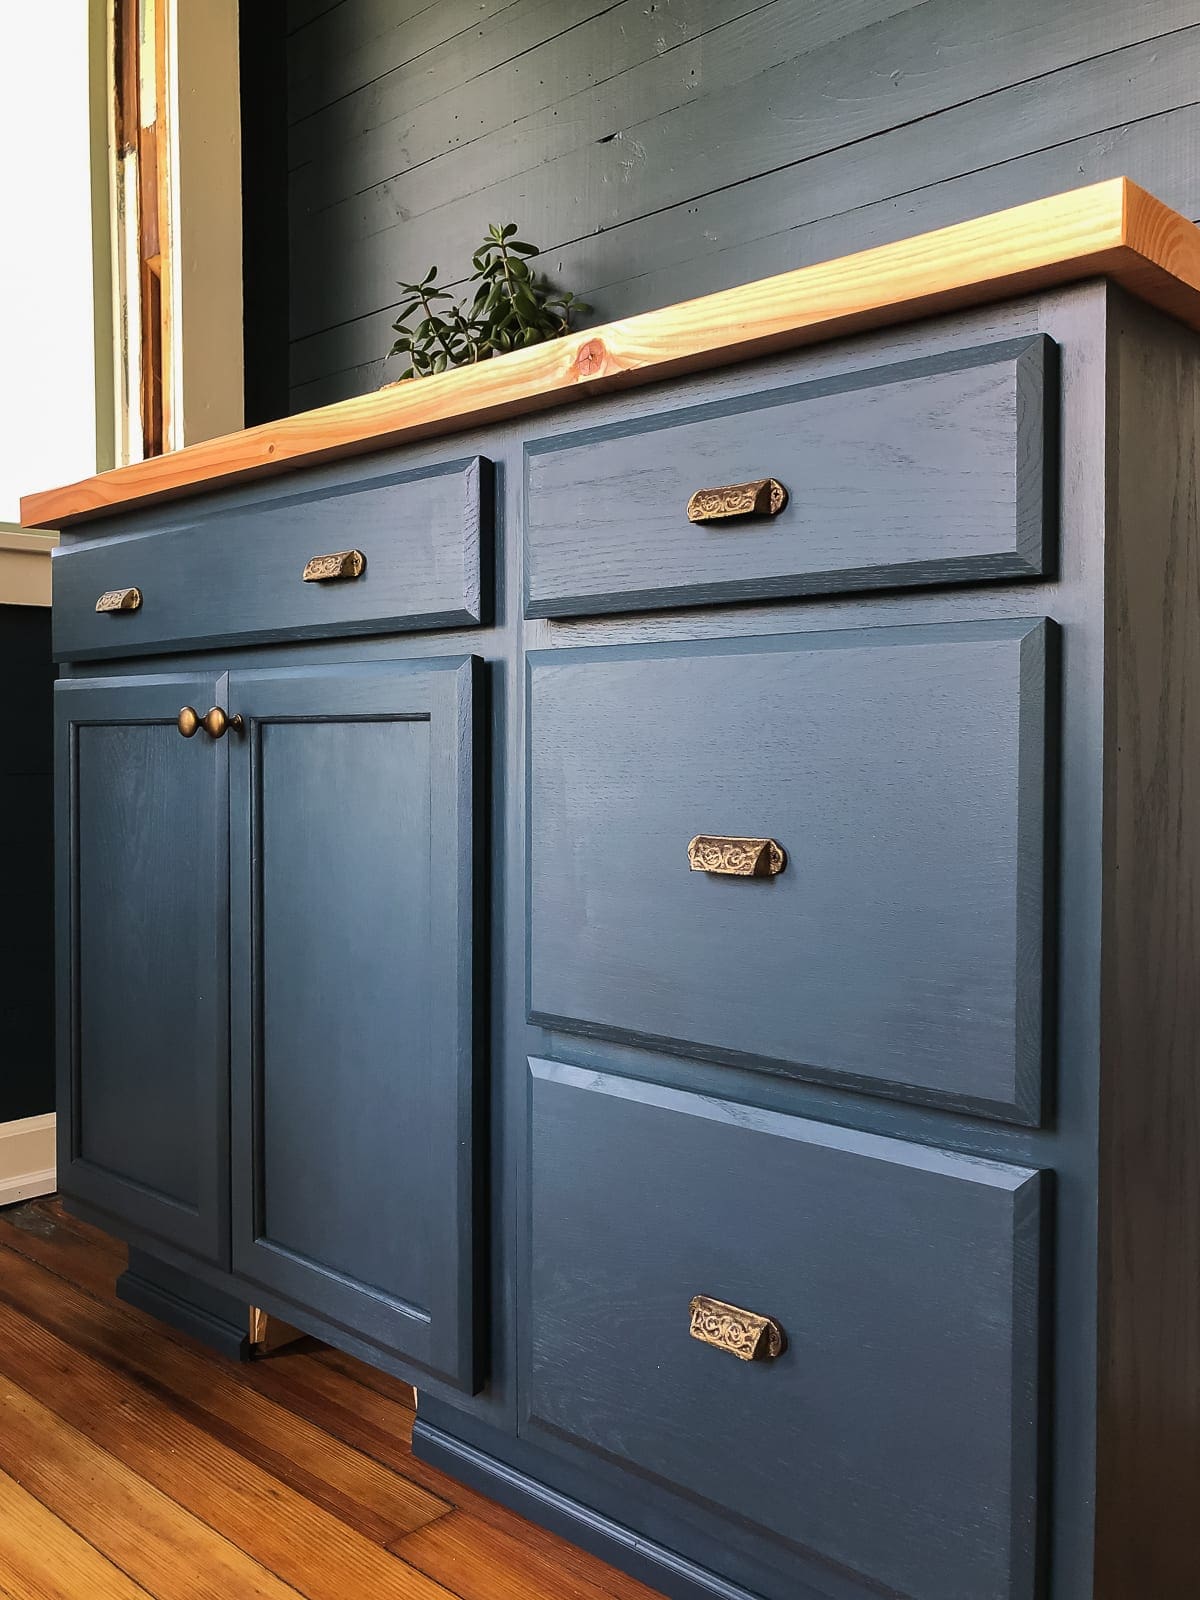 Painting Unfinished Cabinets How To Guide Blake Hill House